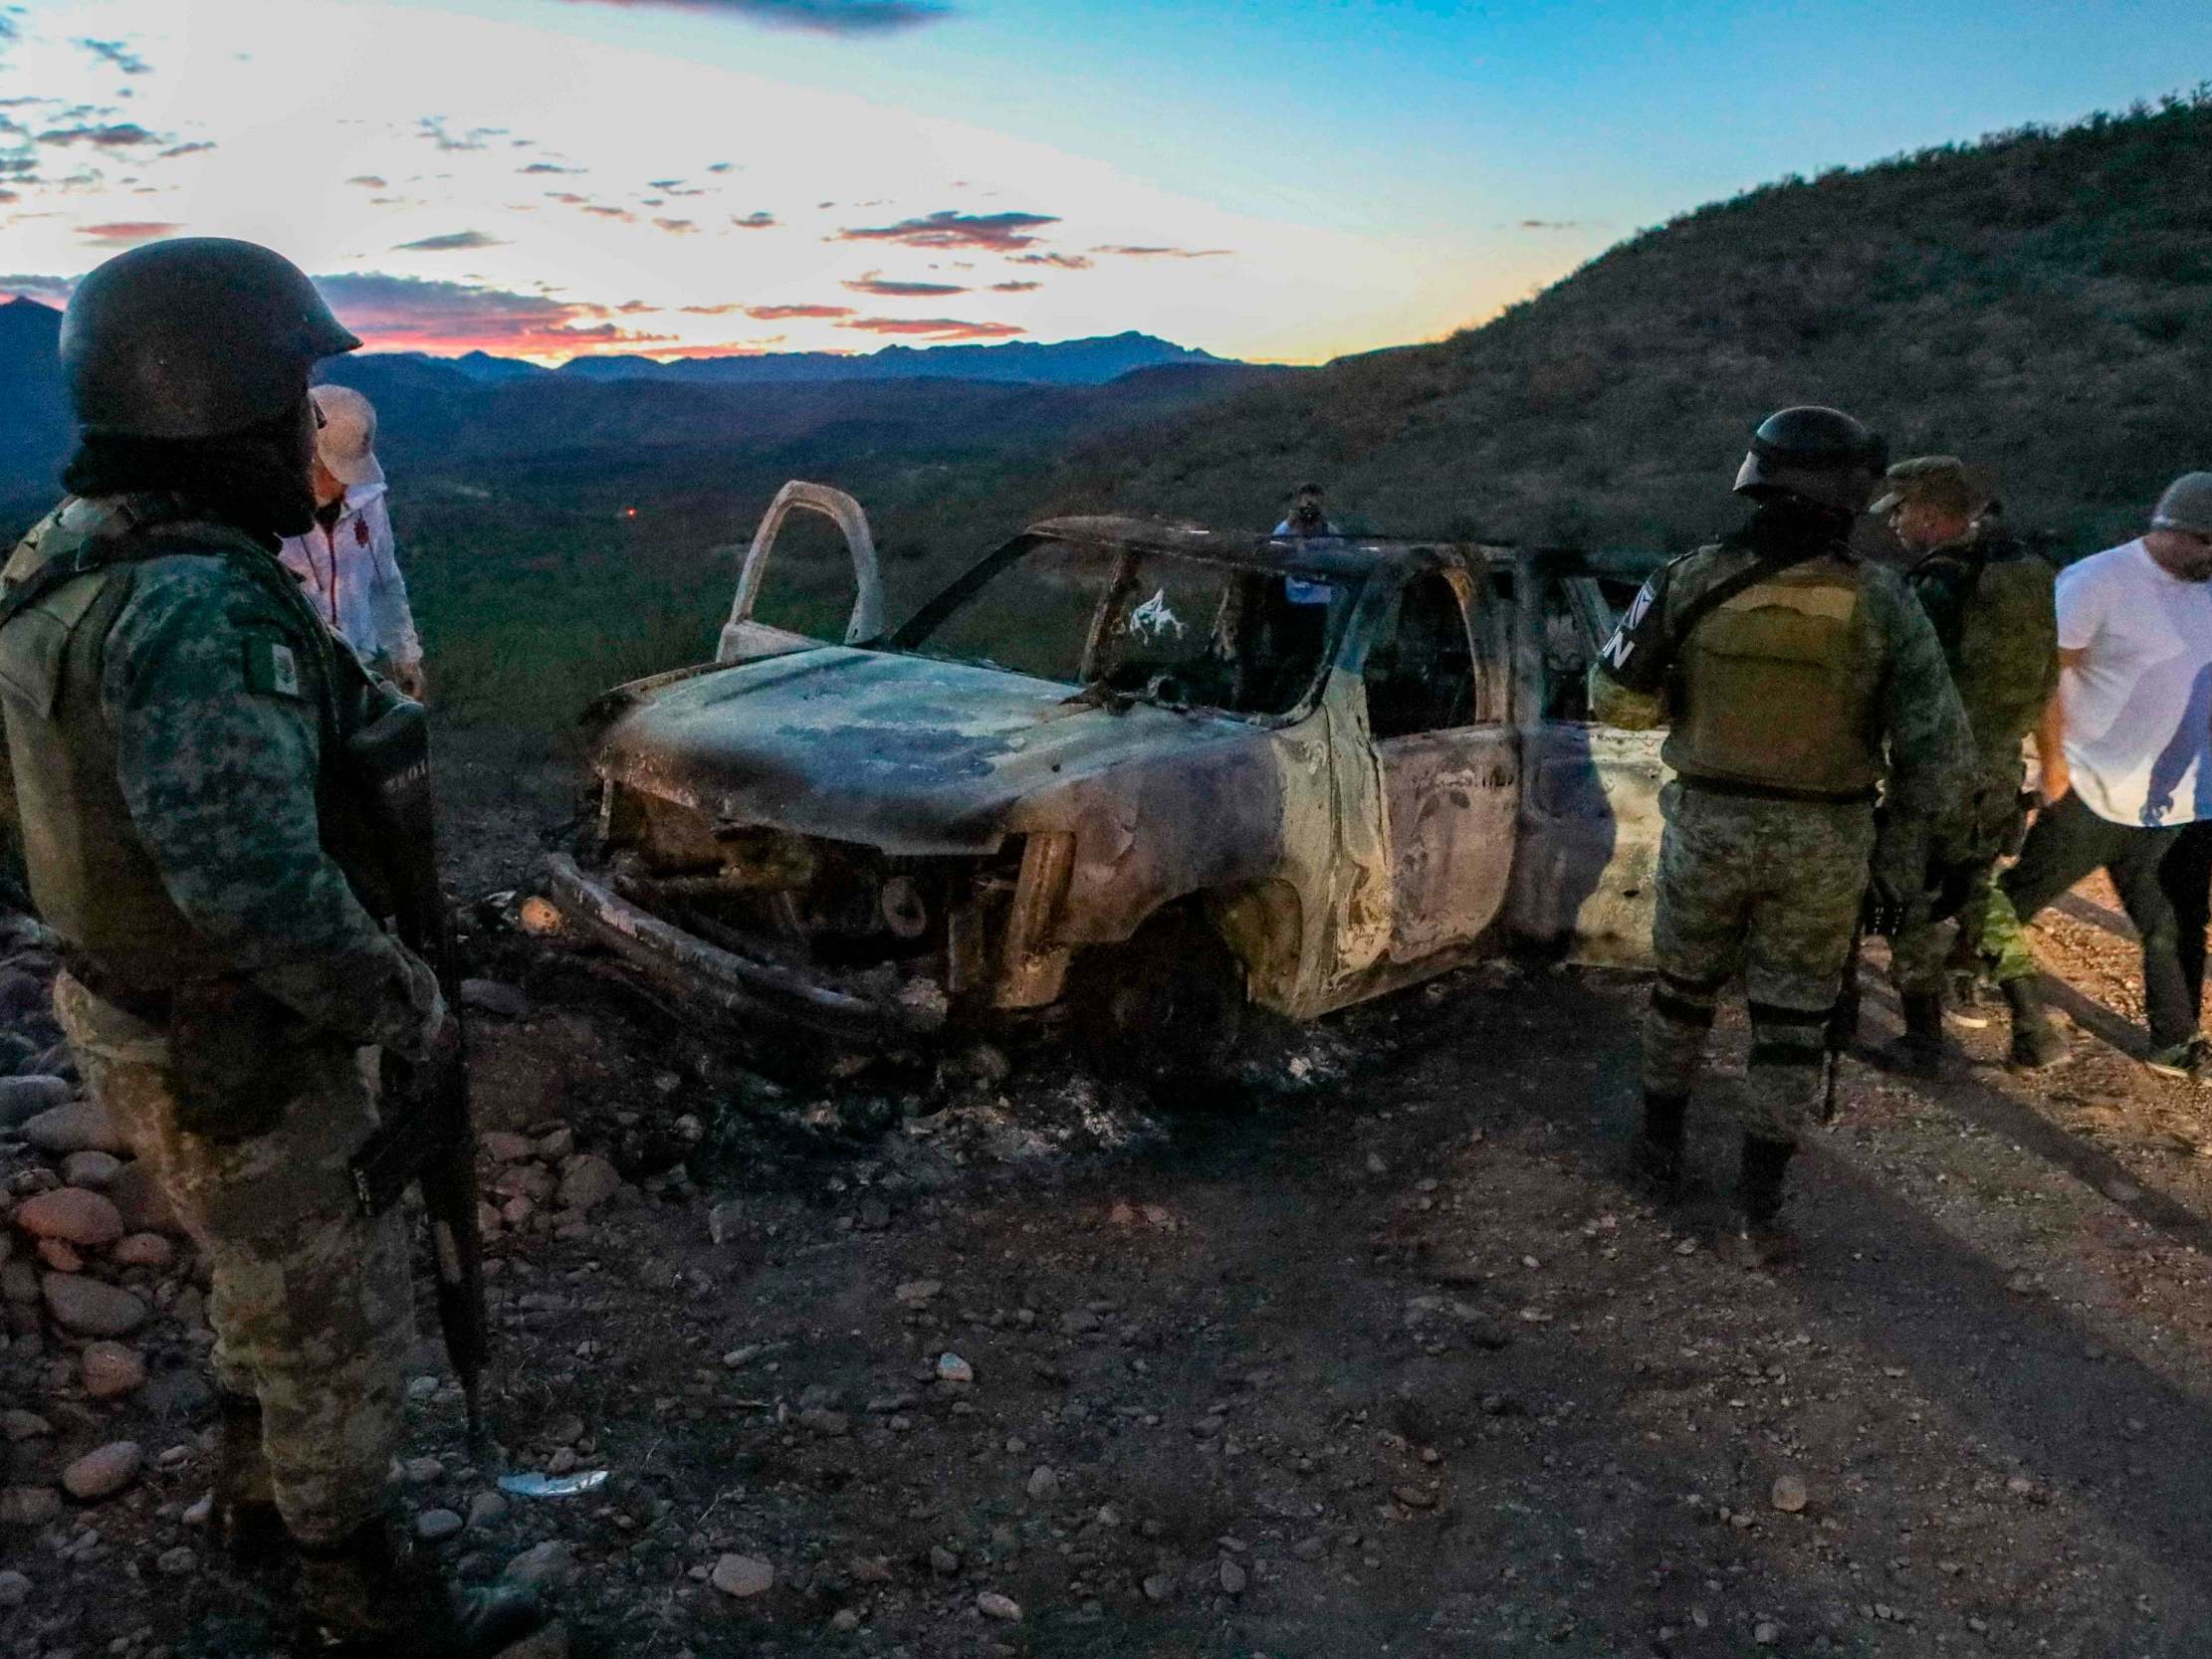 The burned wreckage of a car where some of the nine murdered members of a family were killed during an ambush in Bavispe, Sonora mountains, Mexico